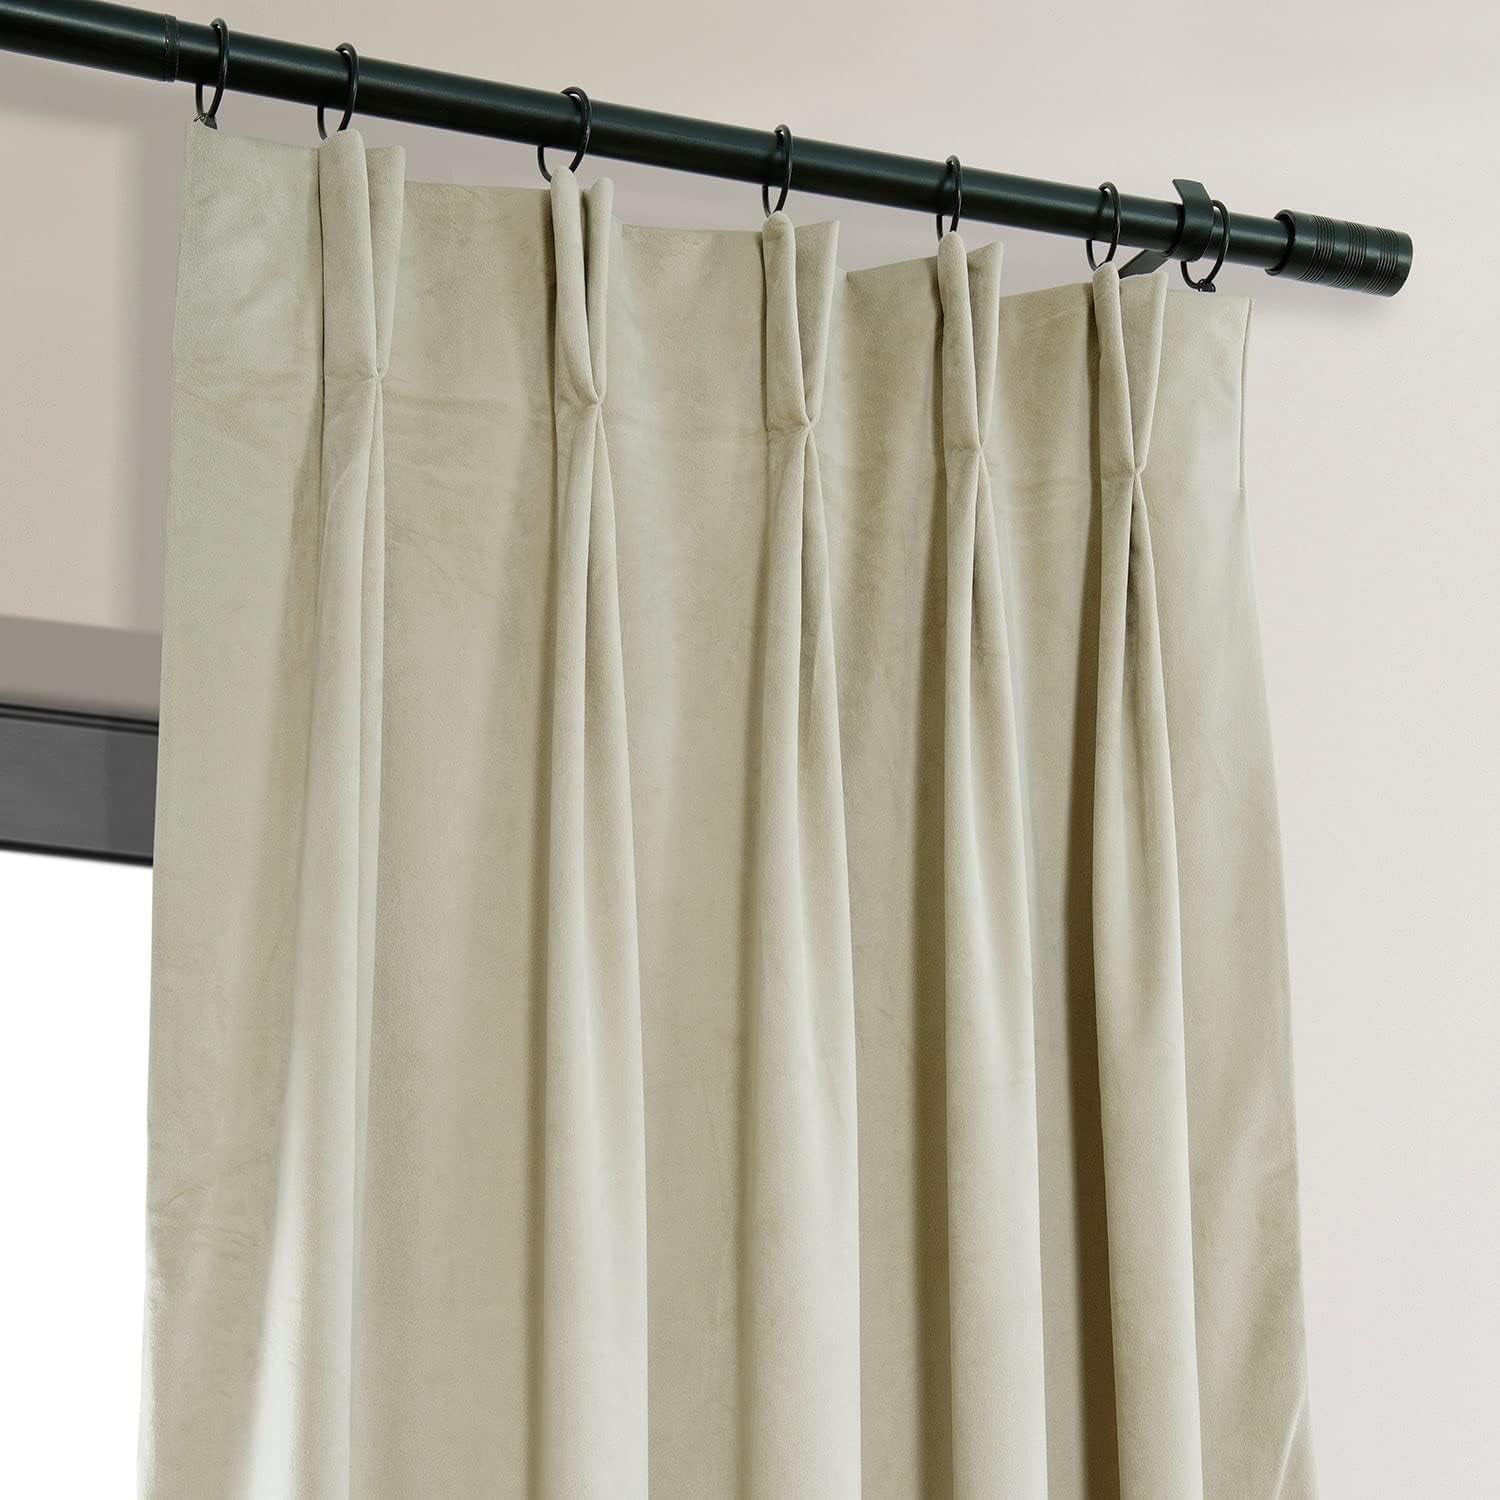 HPD Half Price Drapes Velvet Blackout Curtains/Drapes - 96 Inches Long 1 Panel Blackout Curtain Signature Pleated for Living Room & Bedroom - 25W X 96L, Porcelain White  Exclusive Fabrics & Furnishings   